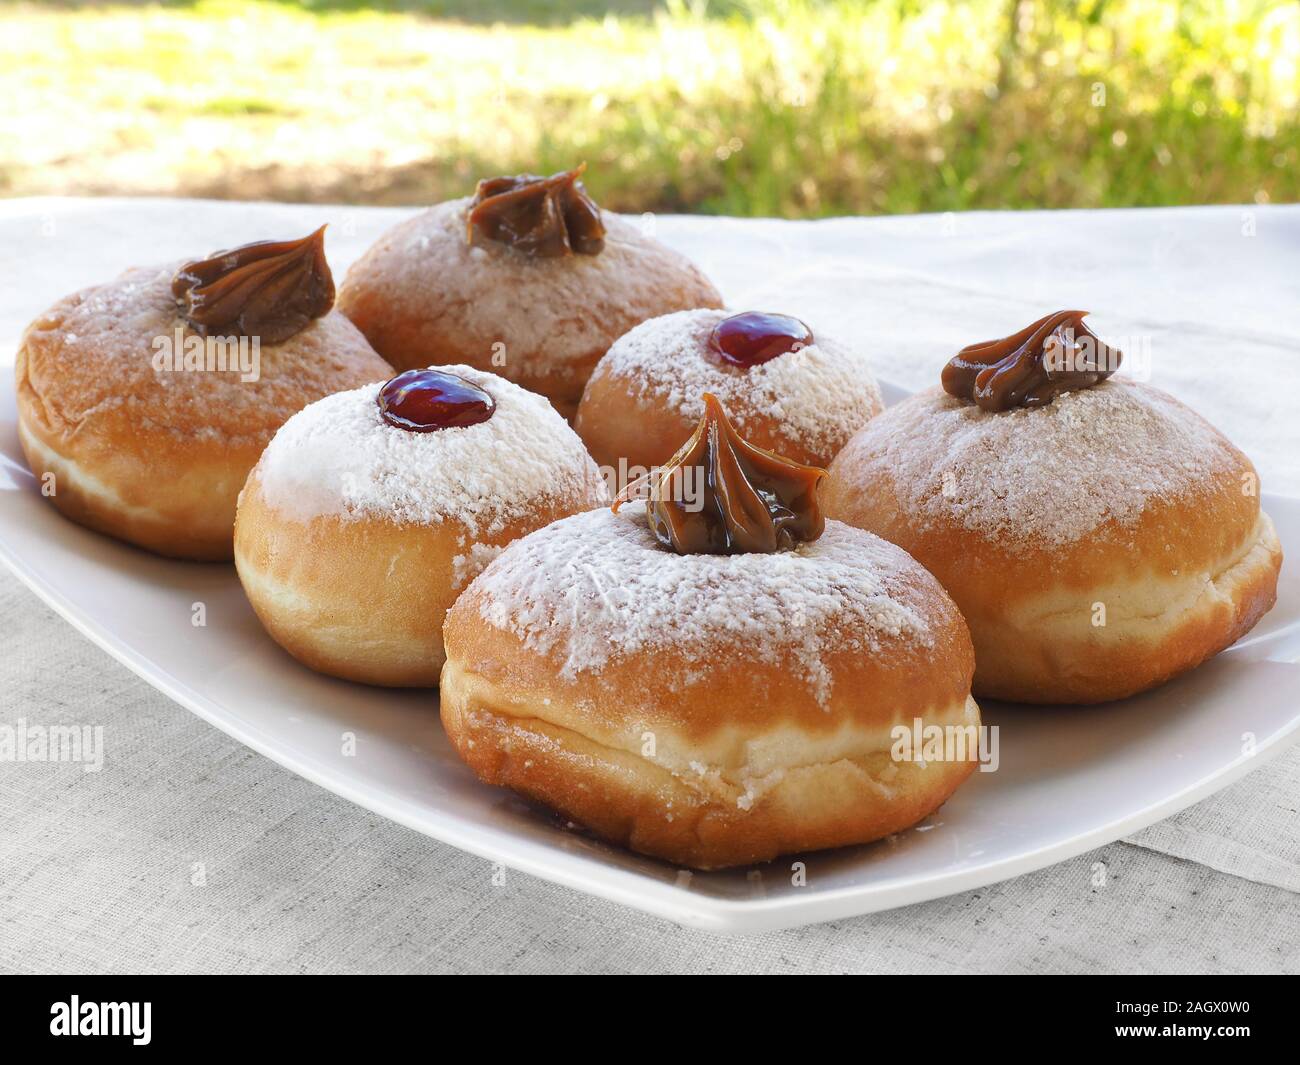 Six delicious Hanukkah donuts with different fillings. Blurred background. Stock Photo